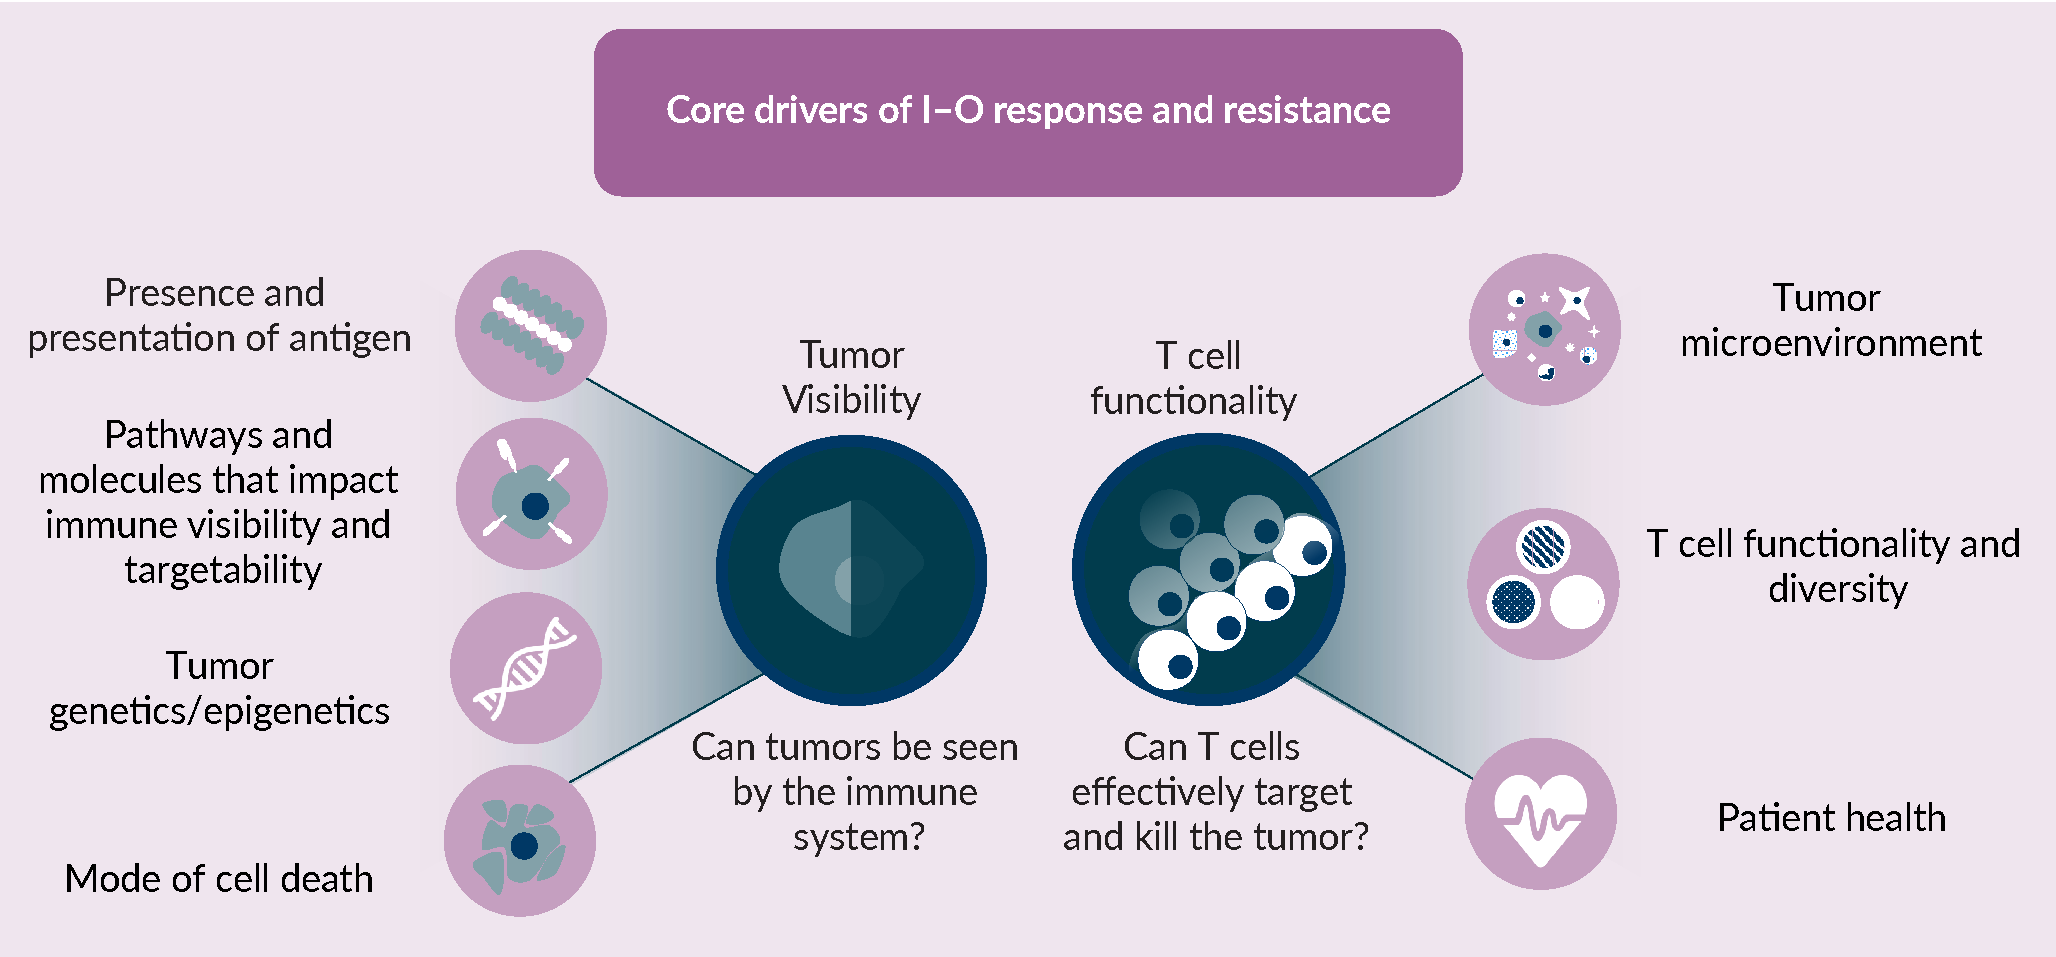 I–O response and resistance is underpinned by two central drivers: 1) whether or not a tumor is visible to the immune system and; 2) whether or not T cells can effectively target and kill those tumor cells. These two core components, tumor visibility and T cell functionality, are subject to modification by a number of different tumour cell intrinsic and extrinsic aspects of biology, which are themselves interdependent. With respect to tumor visibility, the existence of recognisable neoantigens and their effective presentation via the antigen presentation machinery, pathways and molecules that effect visibility at the tumor cell intrinsic level, such as PD-L1 expression, genetic or epigenetic mutations that can impact both of these features, and the mode of tumor or stromal cell death can all independently or together impact the ability to induce a productive and durable immune response. With respect to T cell functionality, the cells and associated cytokine and chemokine signals within the microenvironment are a major determinant of T cell function within that environment, additionally the overall diversity and functional state of the T cells as well as the patients’ current health status, can have a major role on whether T cells can productively kill tumor cells.